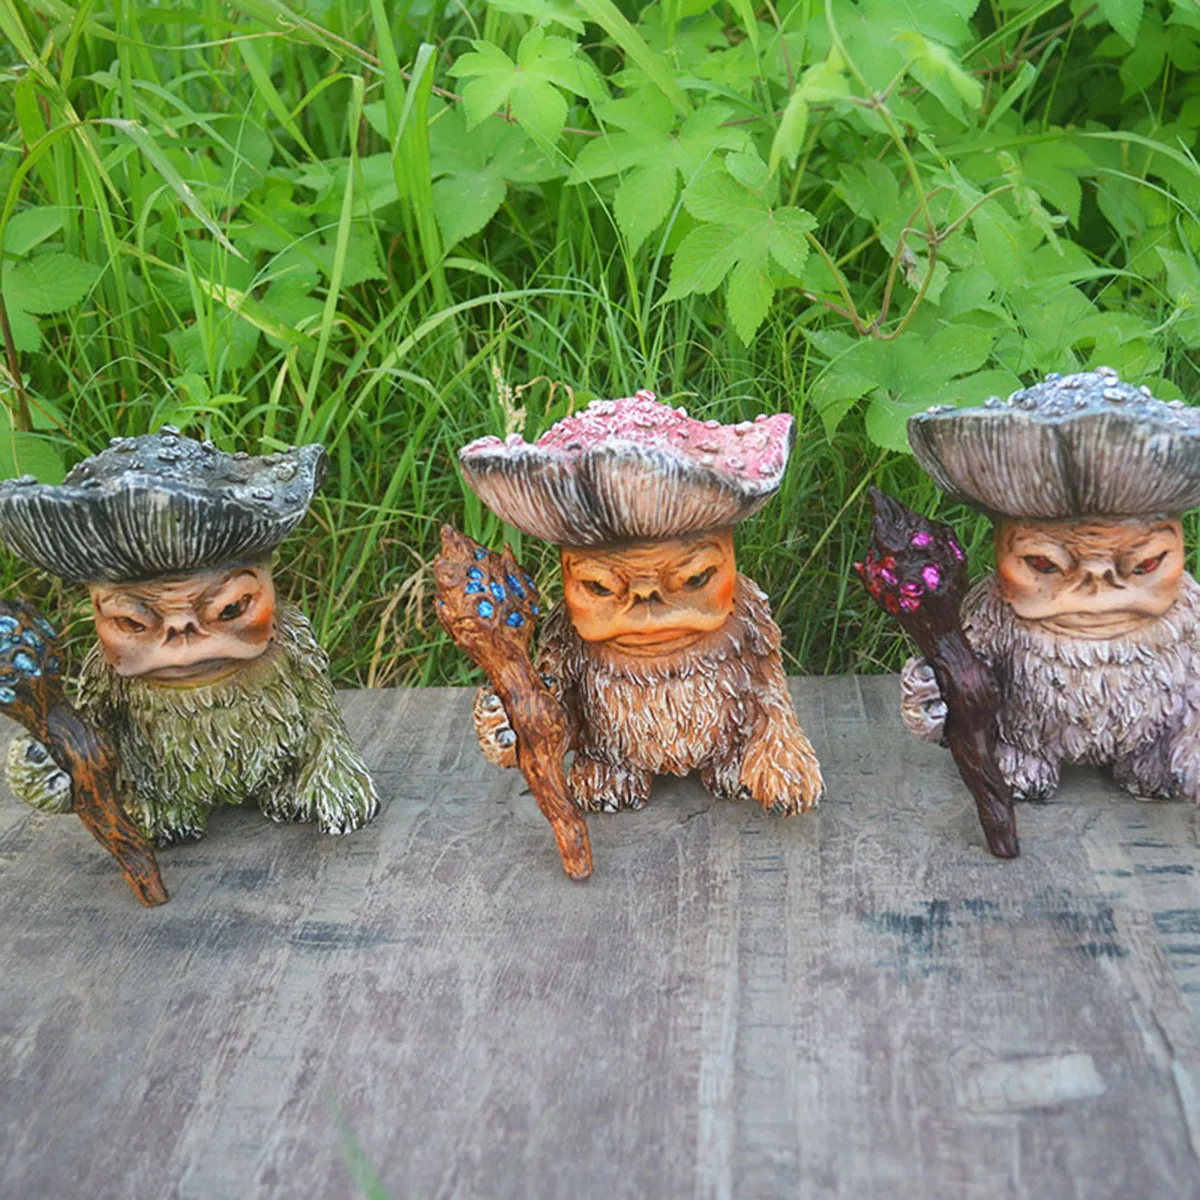 

Independent station new fairy tale mushroom monster shaman wizard resin crafts garden ornaments Halloween decorations